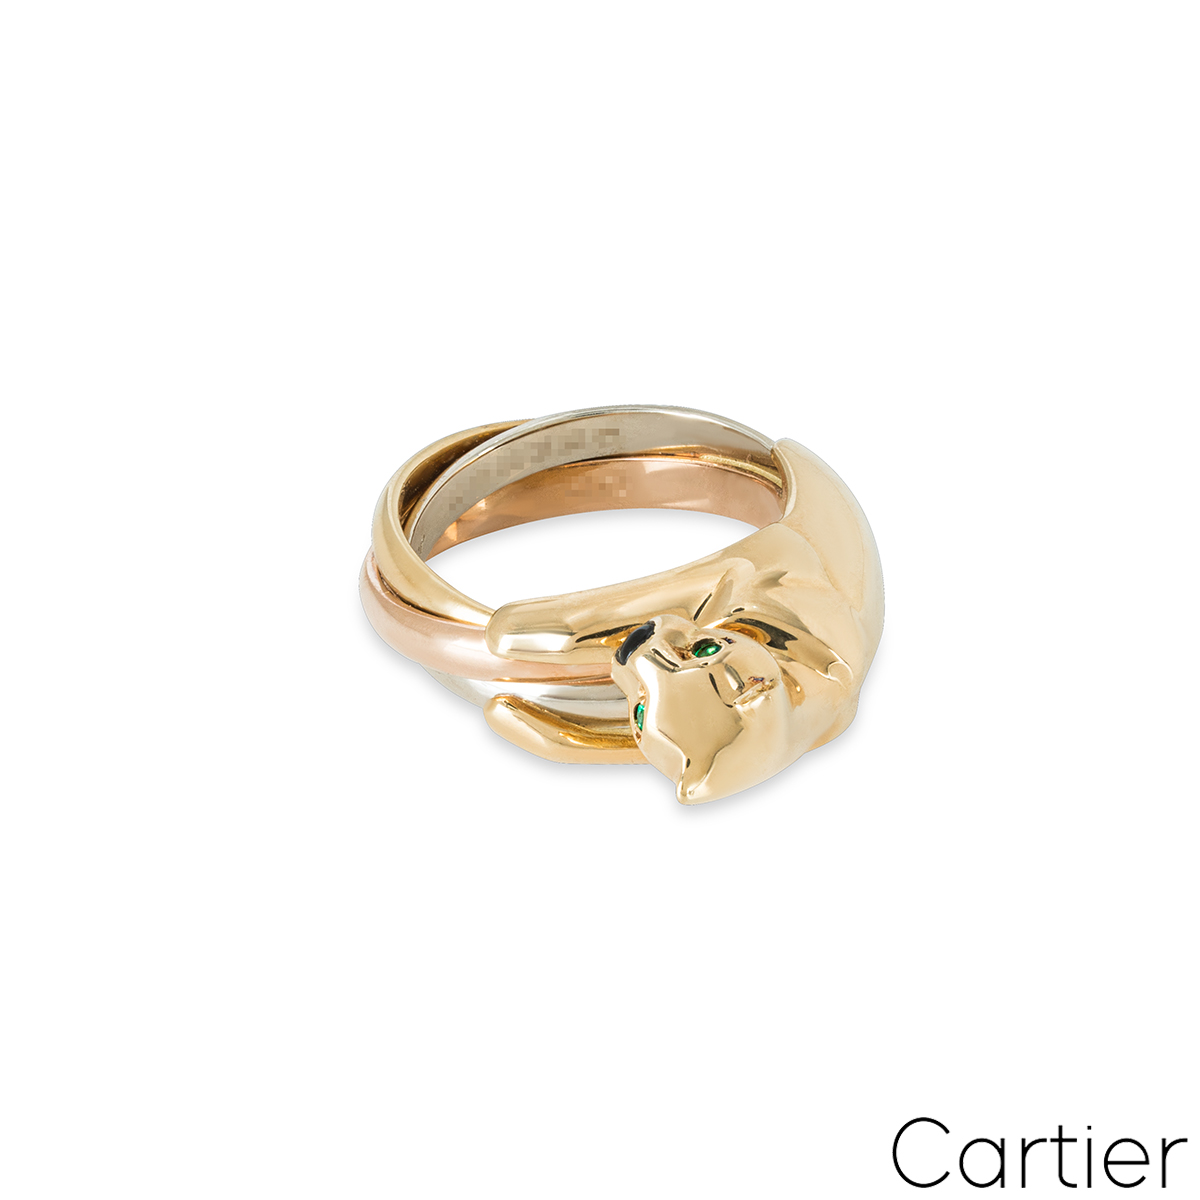 Cartier Tri-Colour Emerald & Onyx Panthere Ring